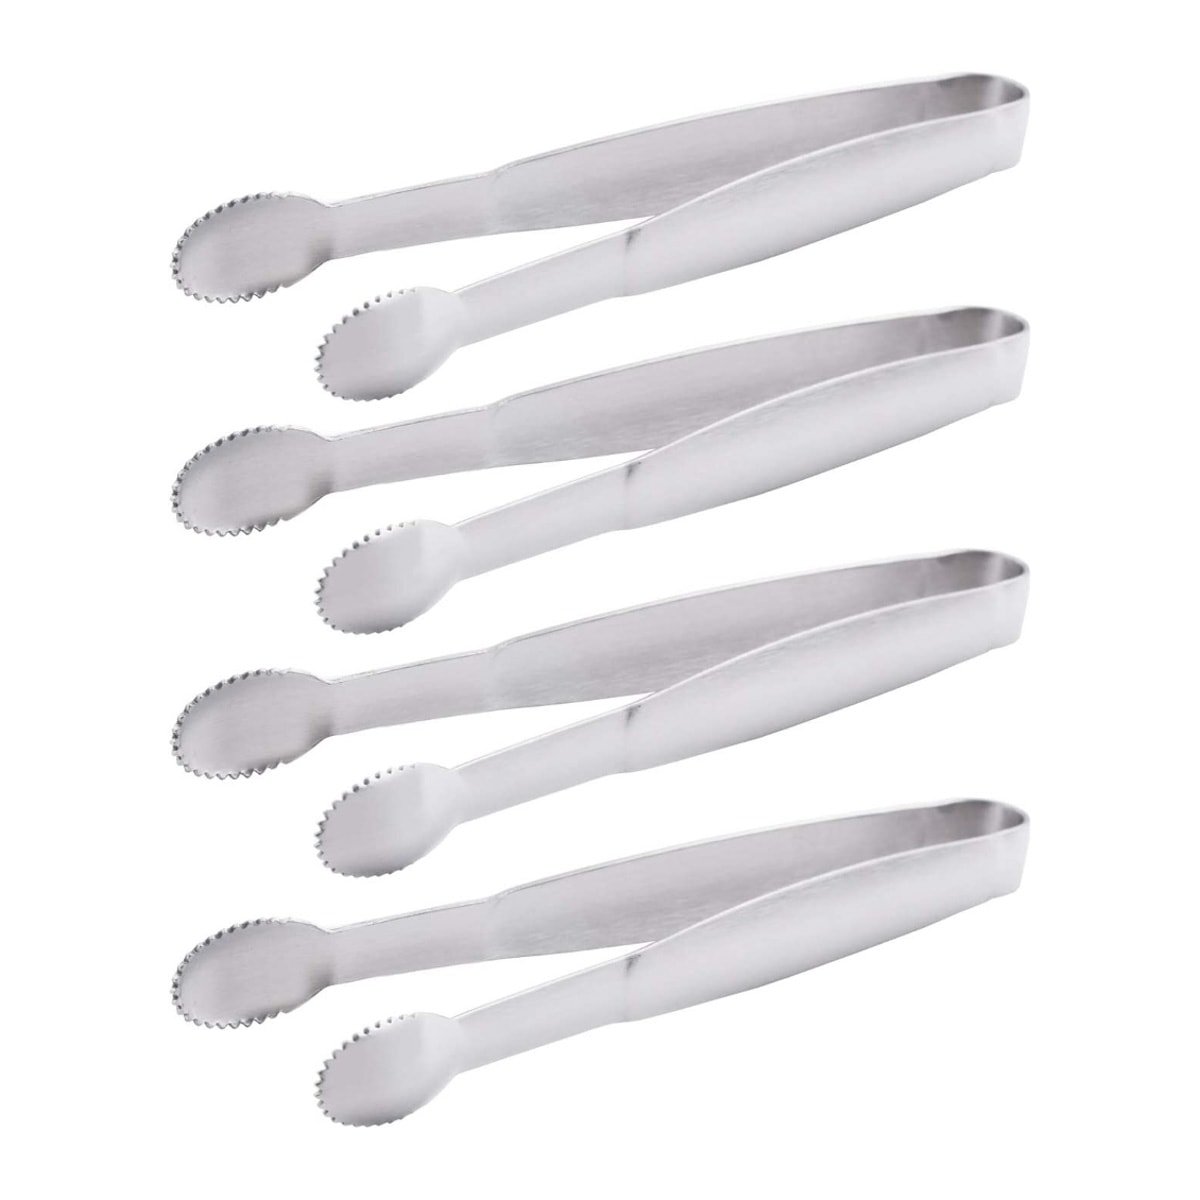 A set of four small stainless steel tongs.